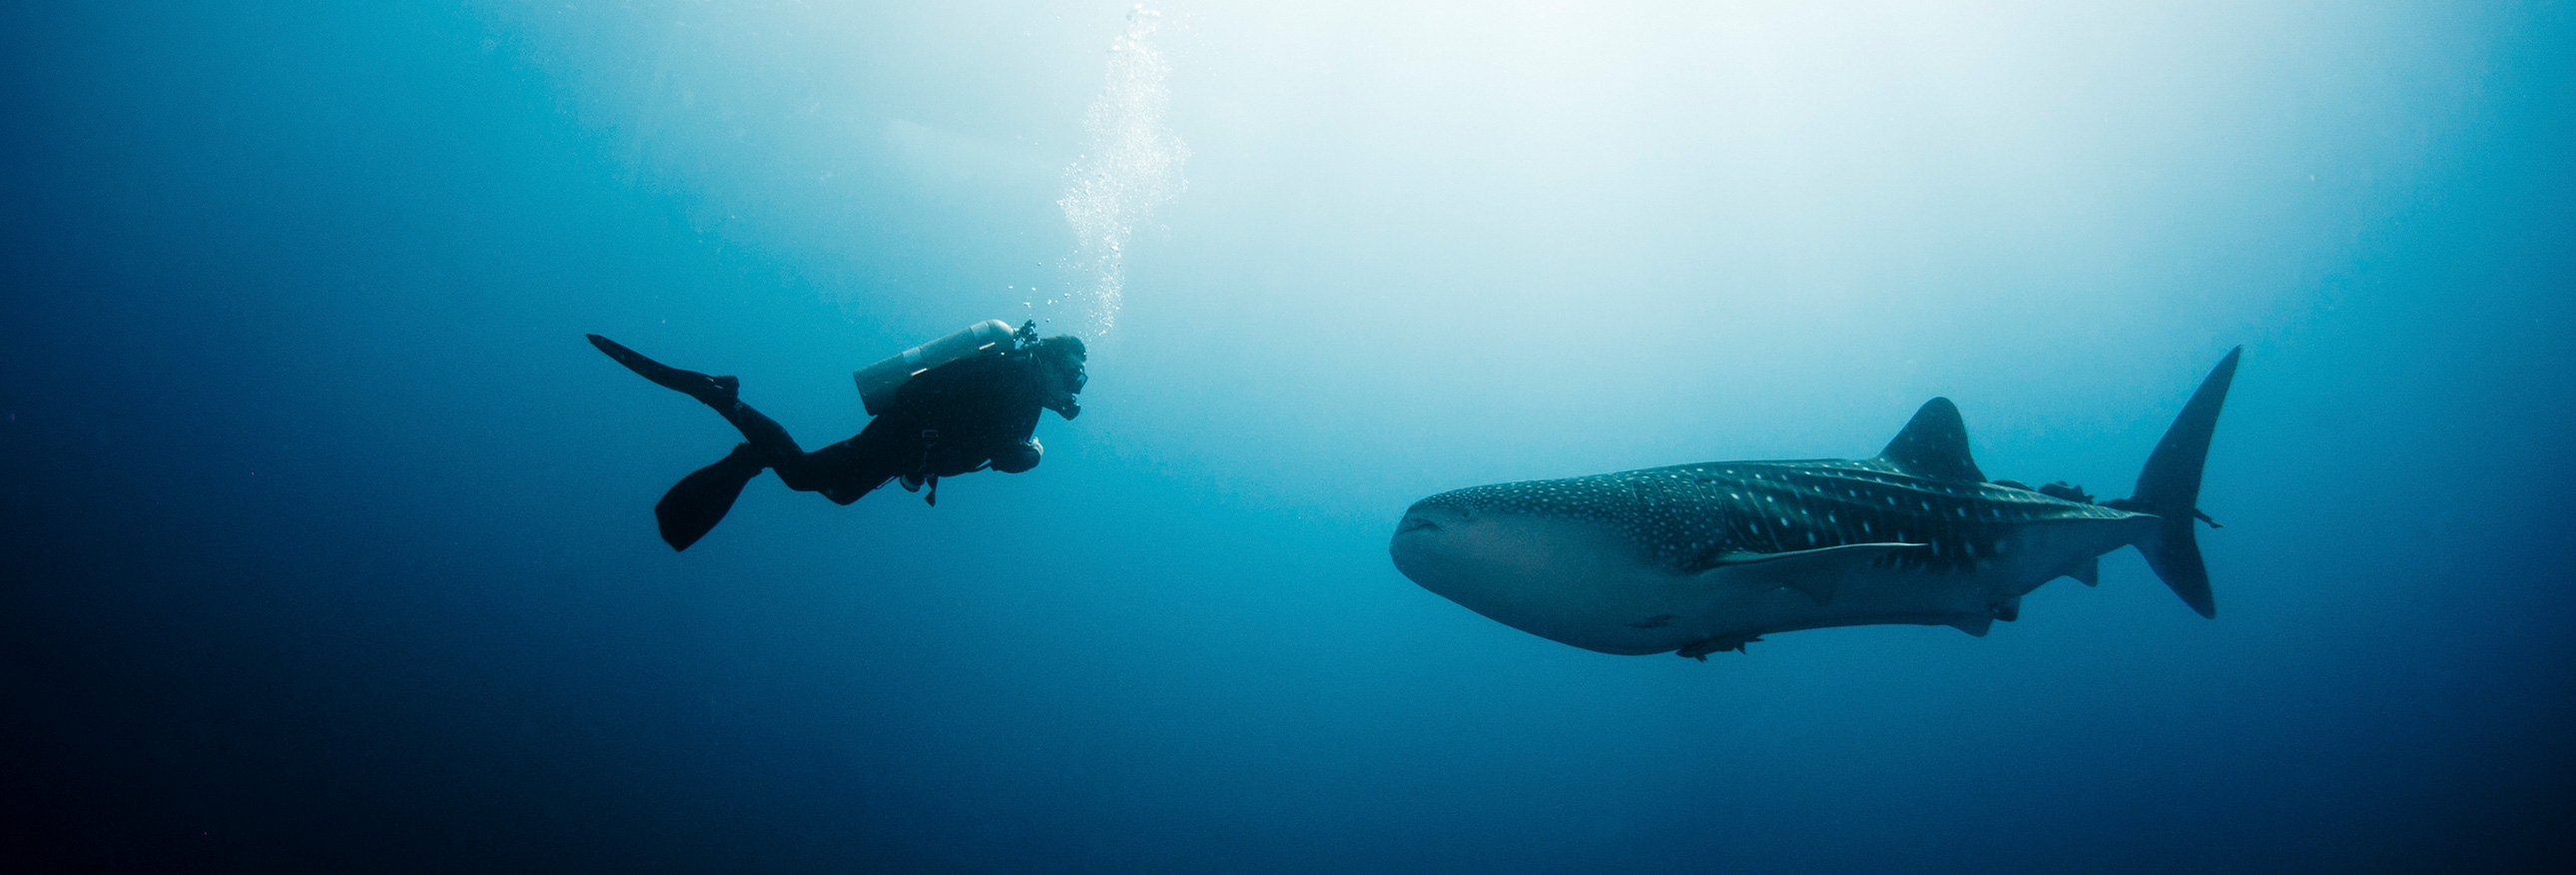 scuba diver and whale shark underwater